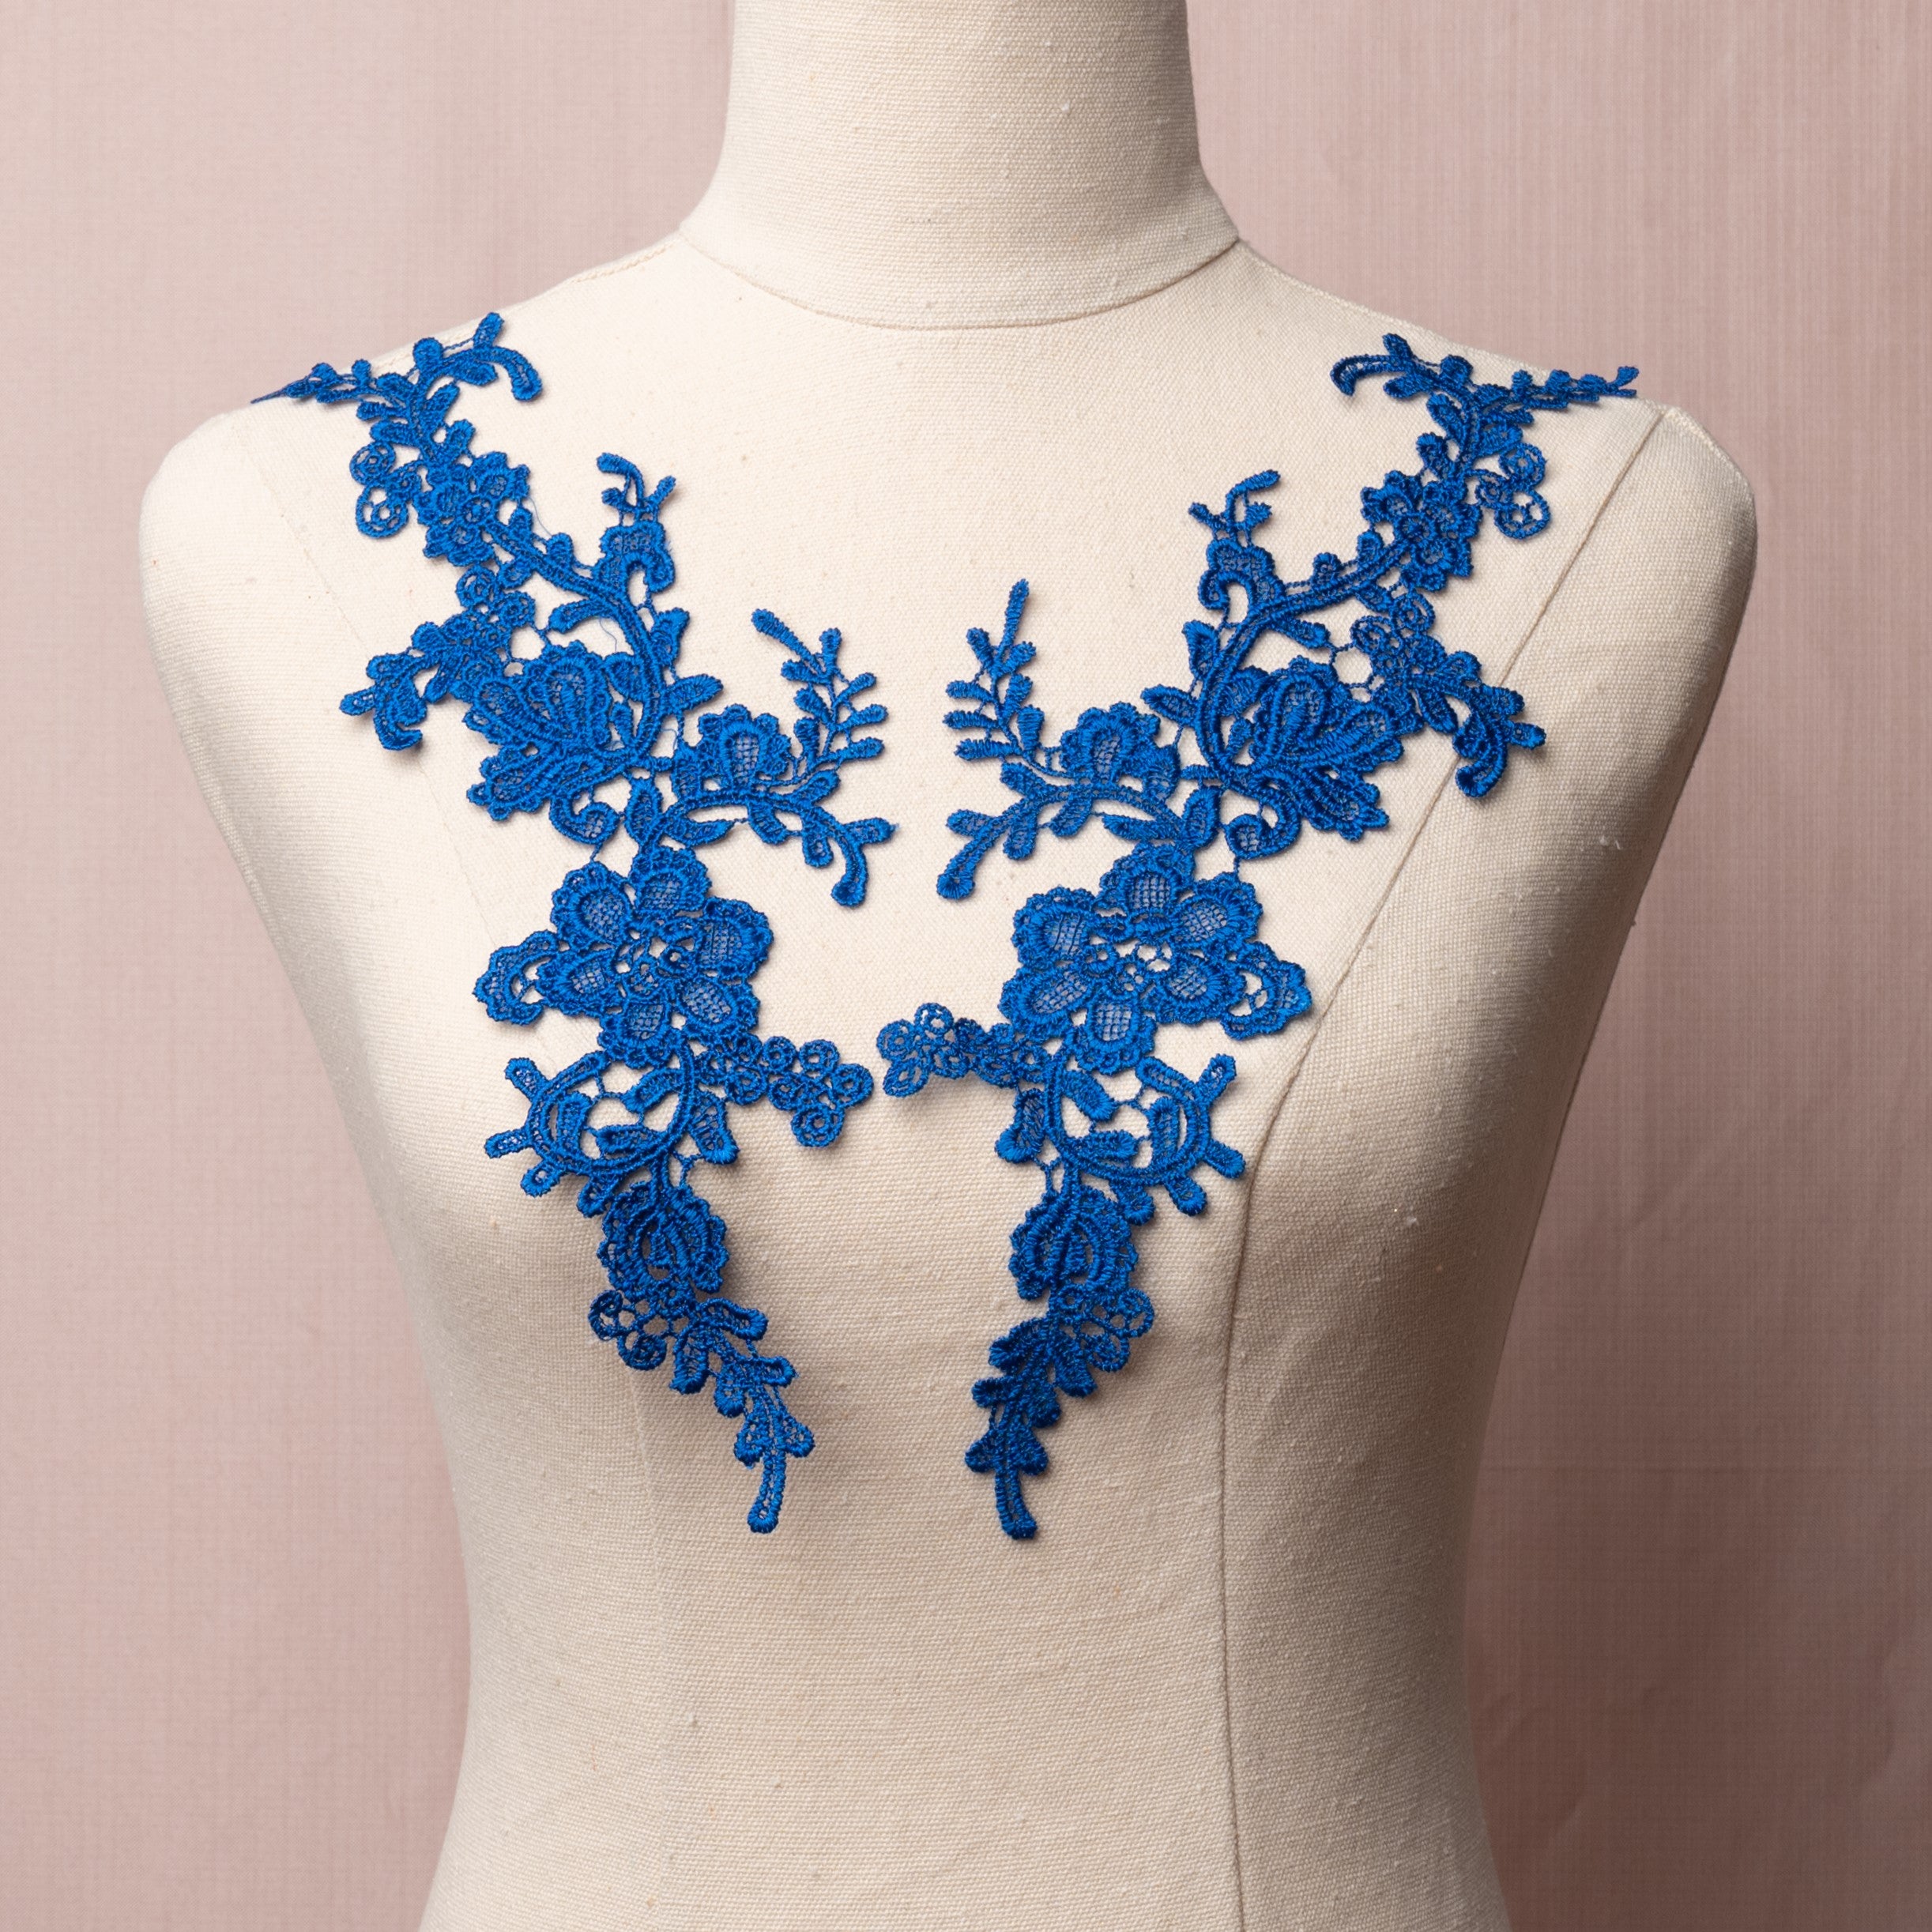 Heavily embroidered royal blue lacy floral applique pair.